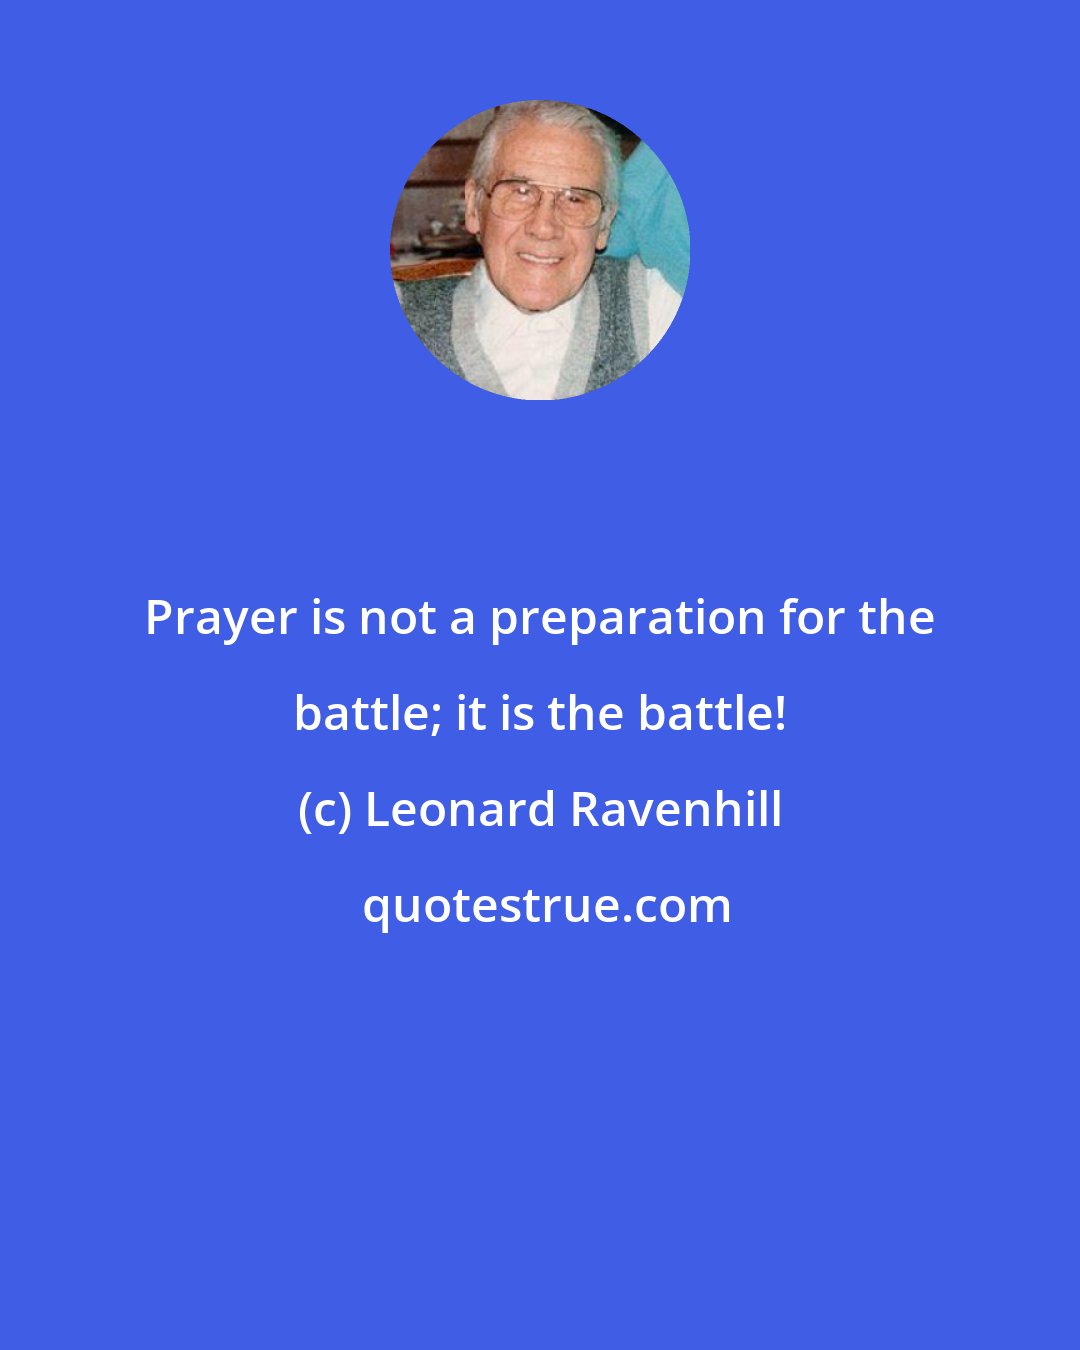 Leonard Ravenhill: Prayer is not a preparation for the battle; it is the battle!